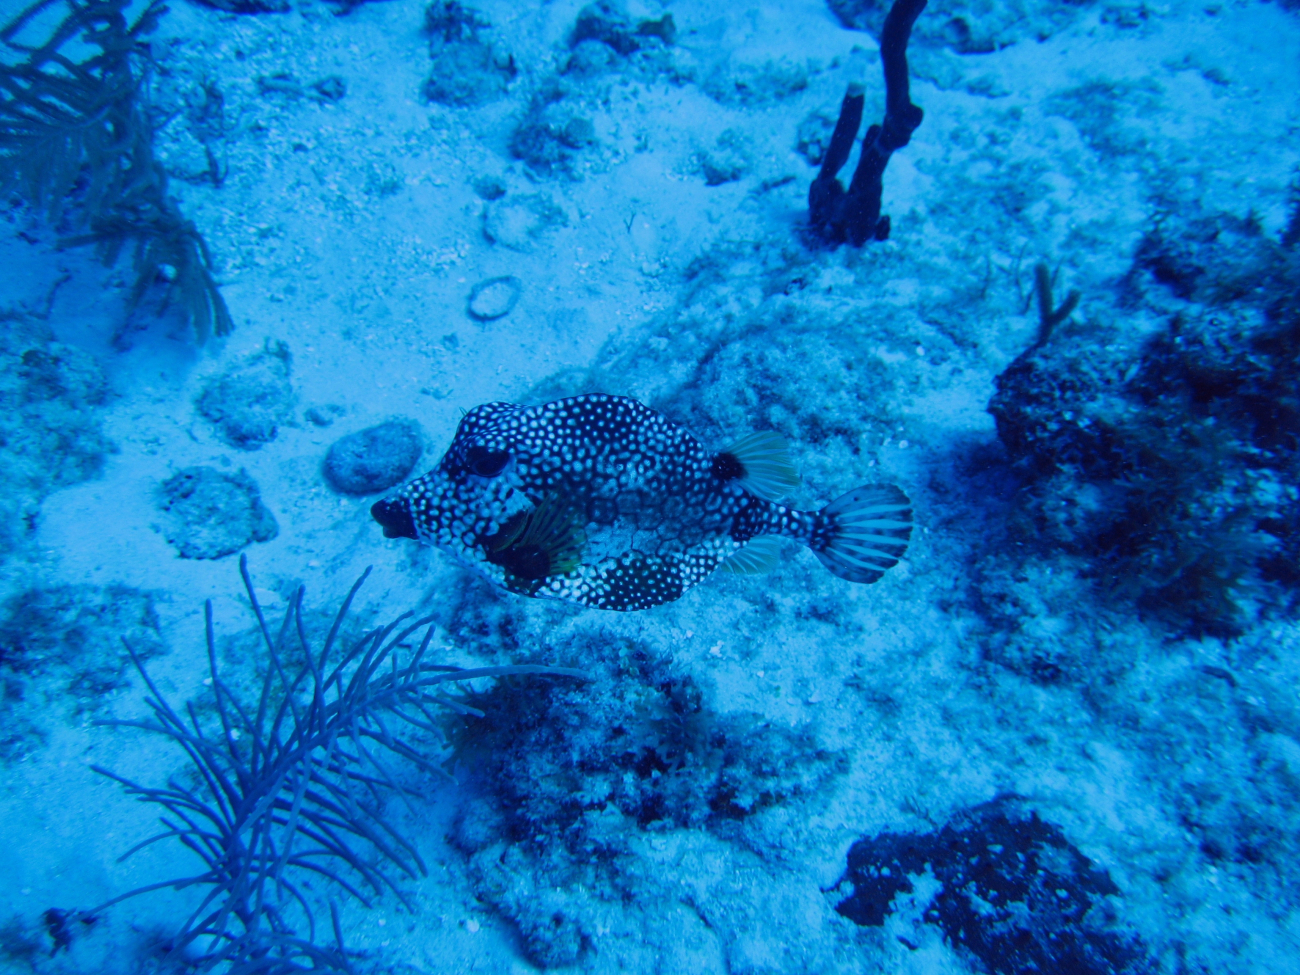 Smooth trunkfish side view (Lactophrys triqueter)